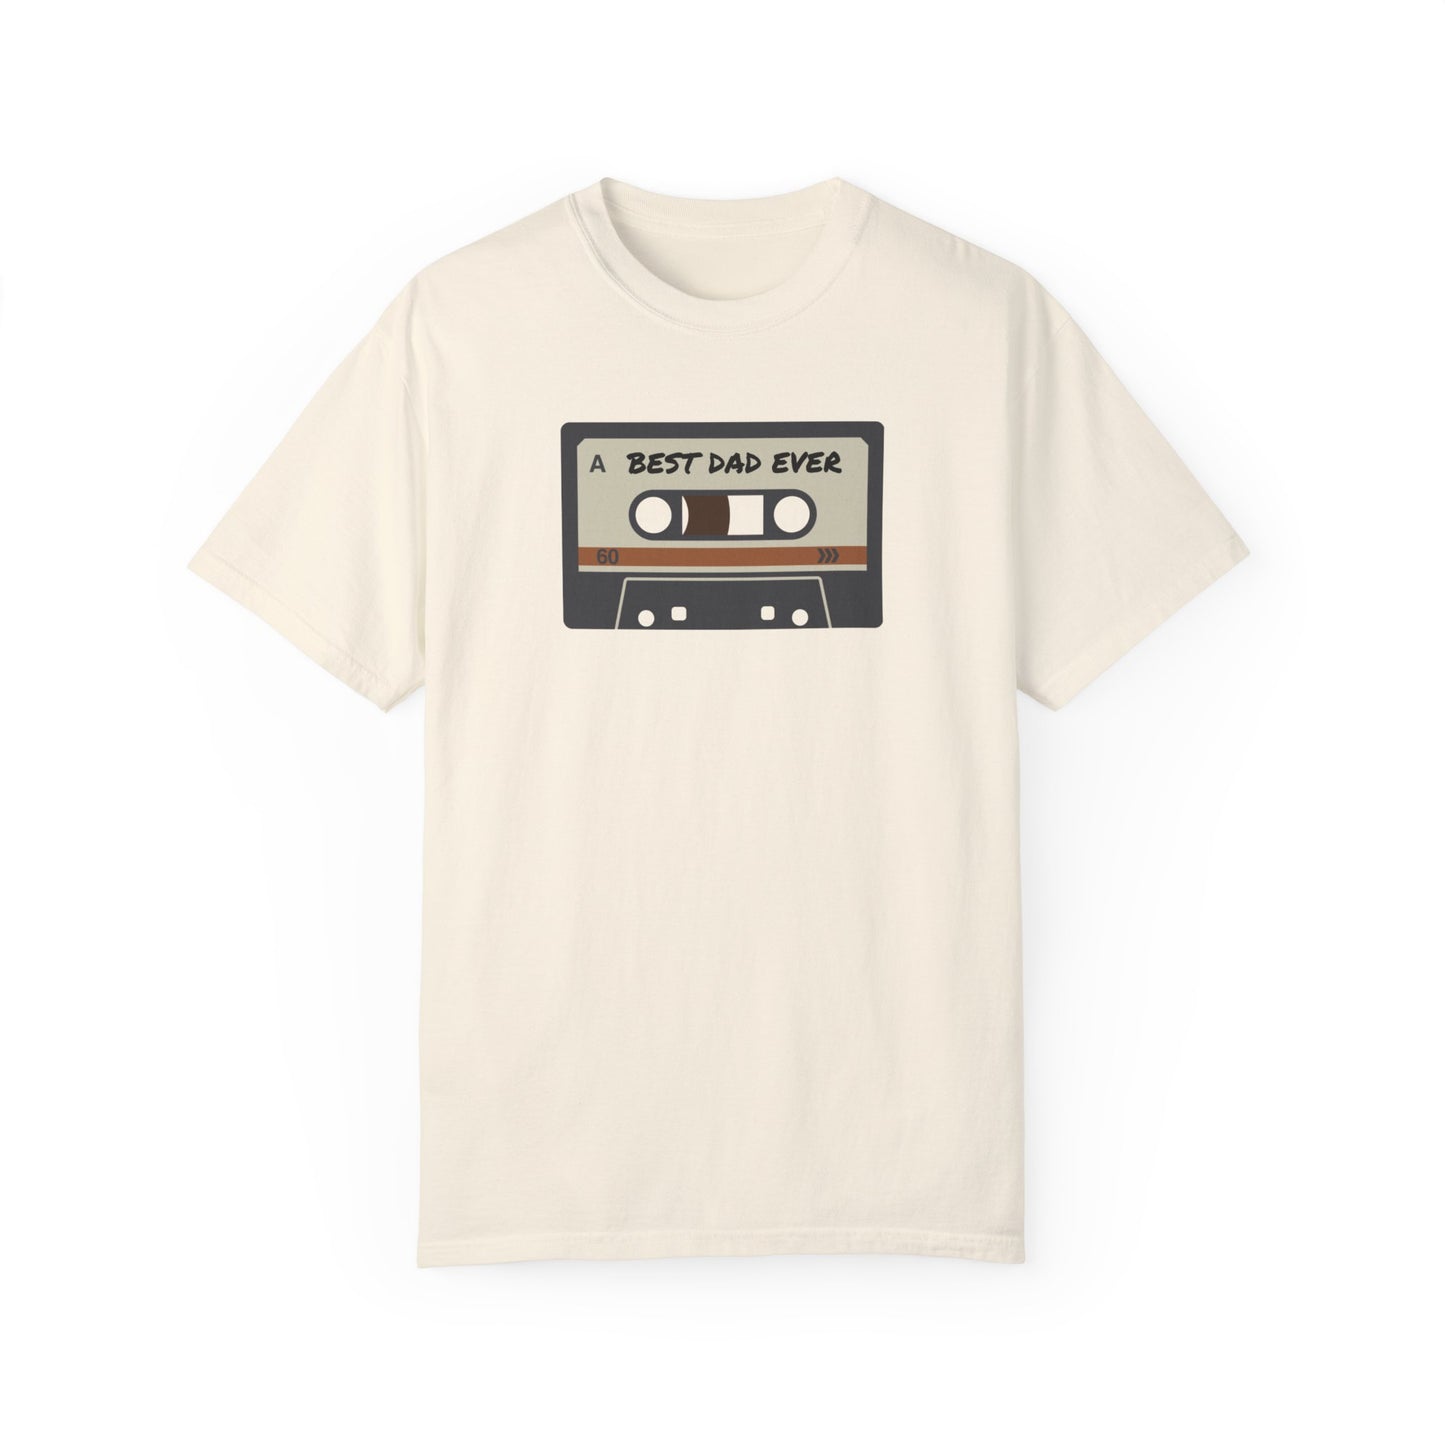 Best Dad Ever Mixtape Tshirt for Father's Day Gift for Musician Music Lover T-shirt Retro Dad Vibes Comfort Colors Tee Shirt Made in USA